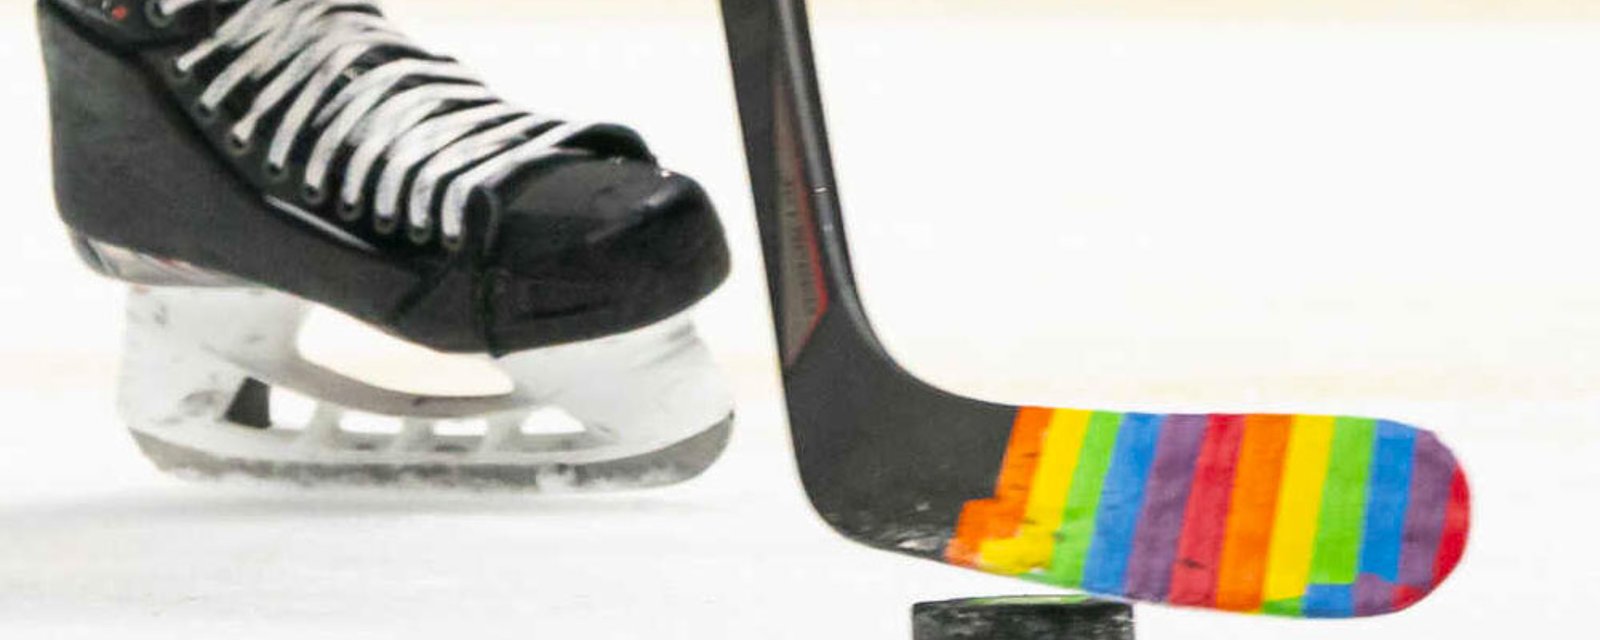 NHL axes policy, NHL players can now show support for Pride